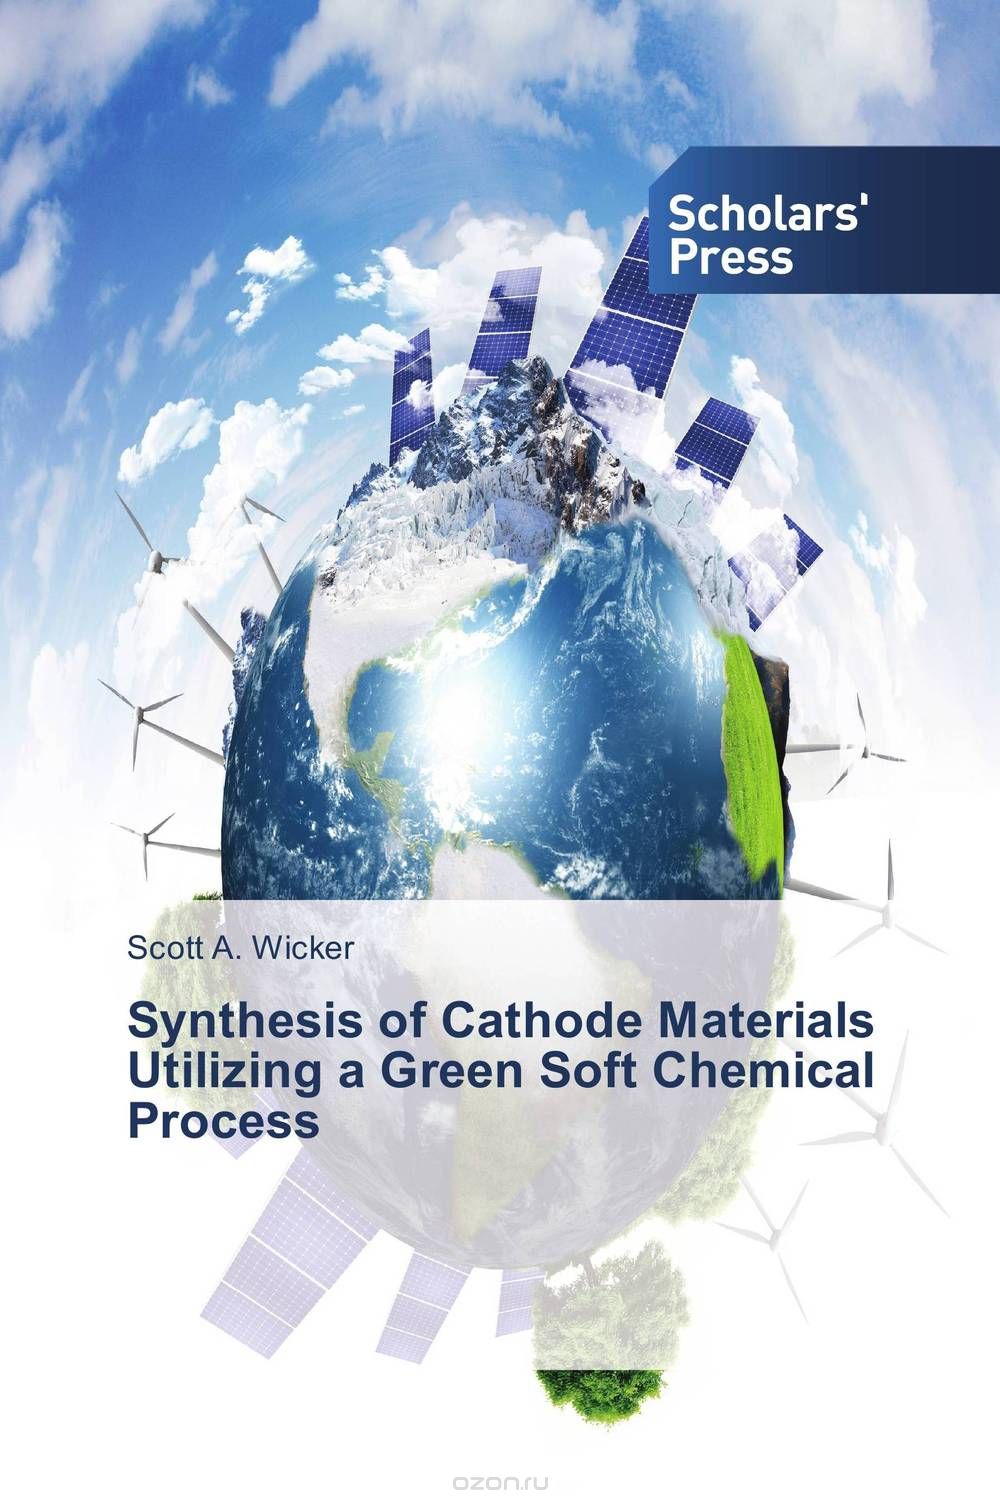 Synthesis of Cathode Materials Utilizing a Green Soft Chemical Process